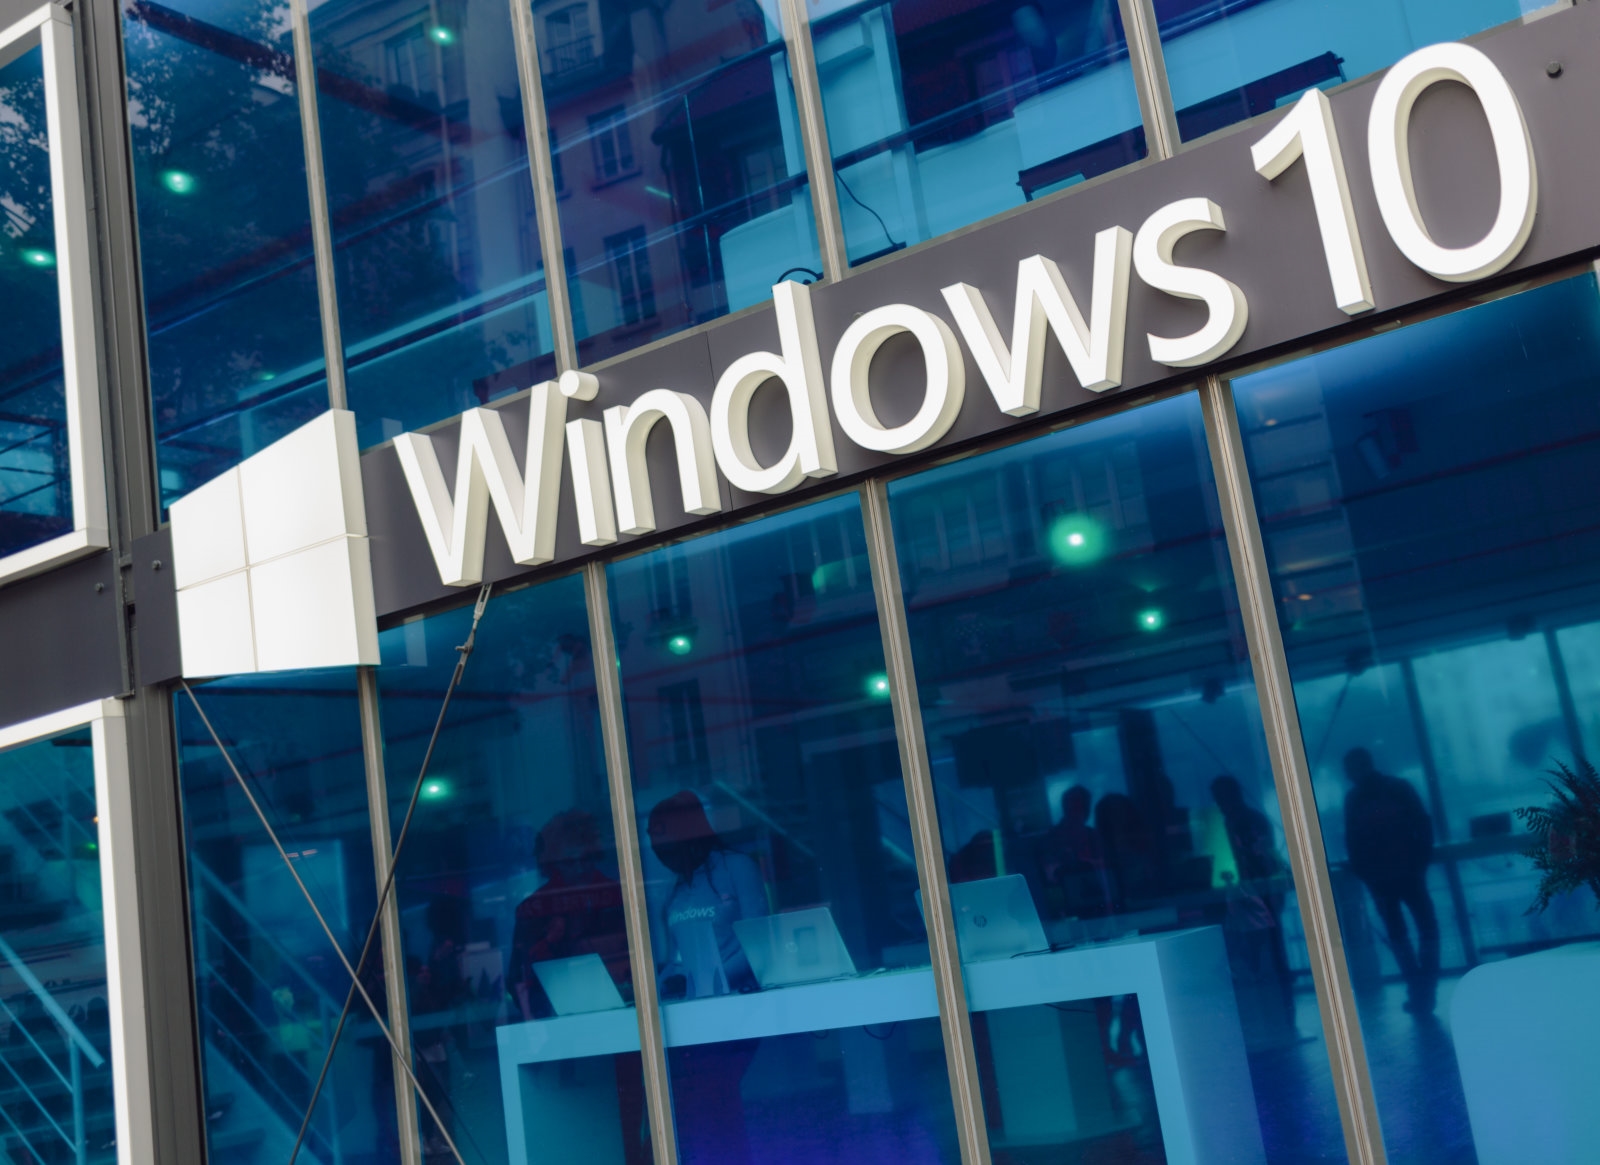 Windows 10's May update won’t work on PCs with USB storage or SD cards | DeviceDaily.com